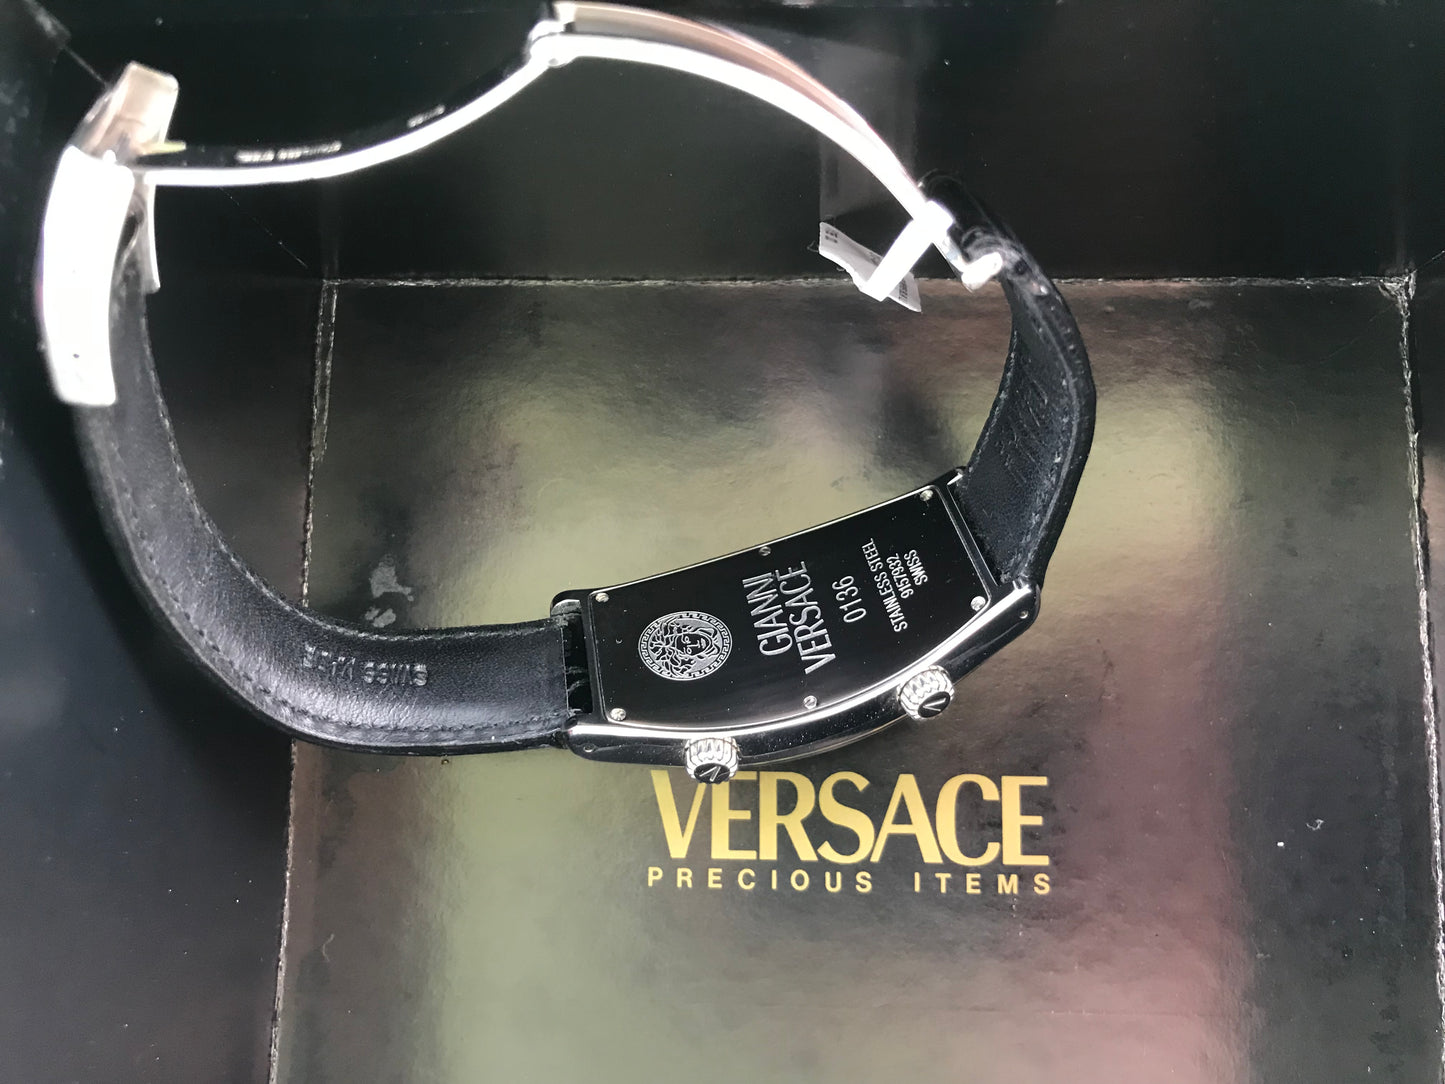 Gianni Versace Mens Love Time Watch